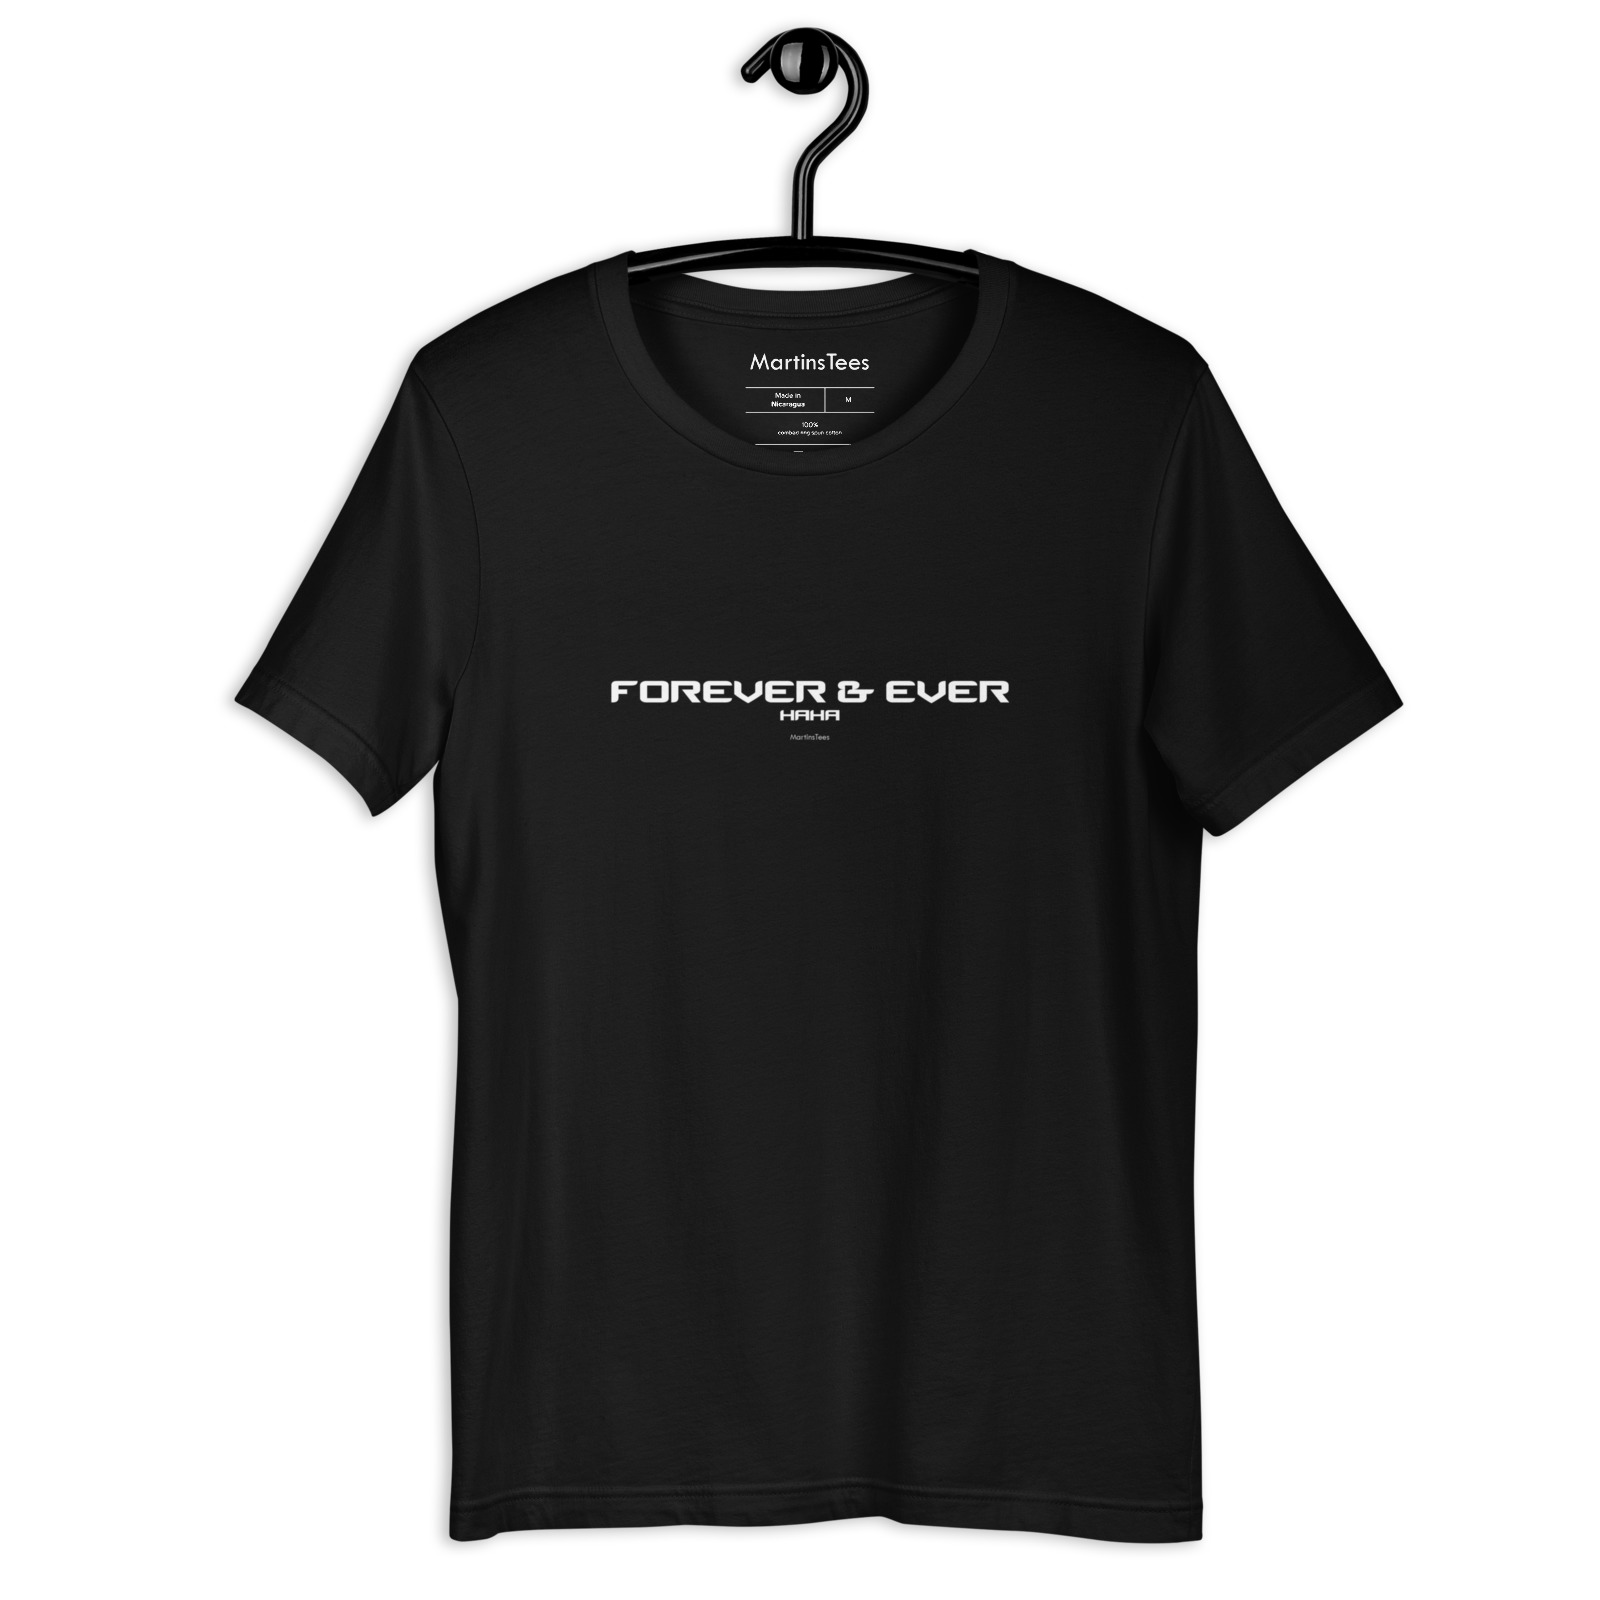 T-shirt: FOREVER & EVER - HAHA